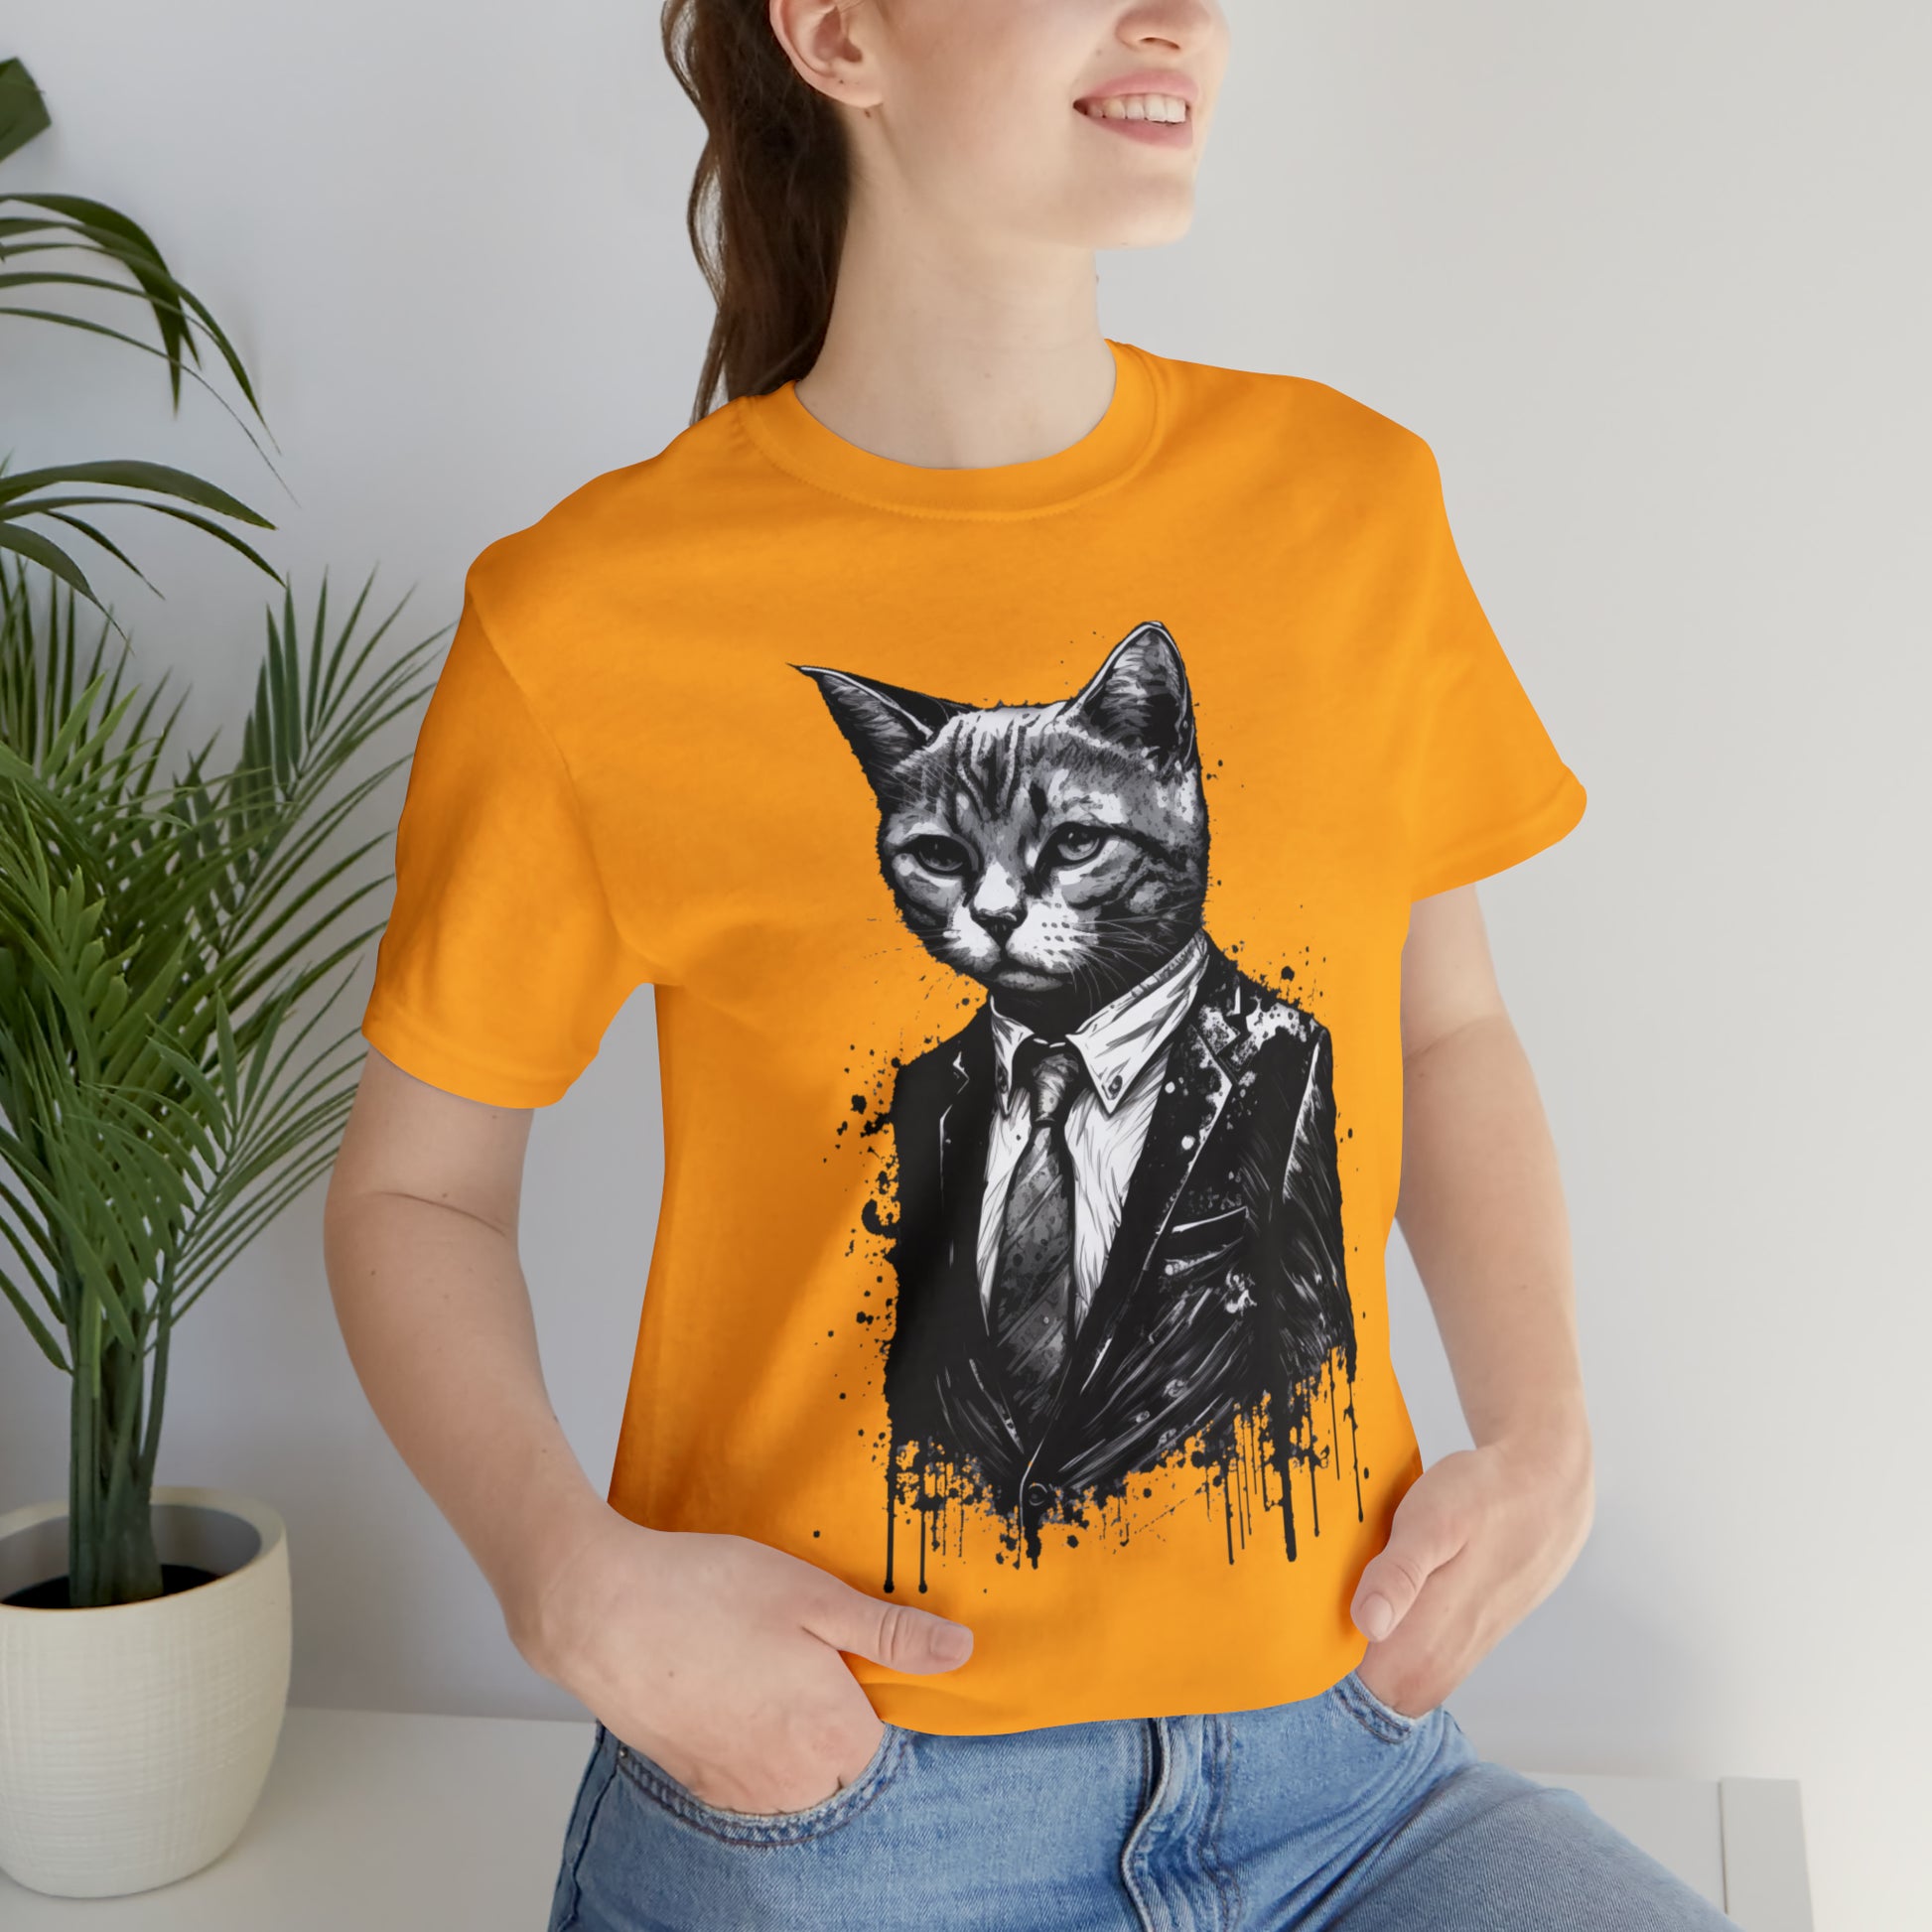 Elegant Cat in a Suit T-shirt, Cat Suit Outfit Tee shirt, Black Suit shirt, Business cat shirt, Boss cat tshirt, gift for cat lover